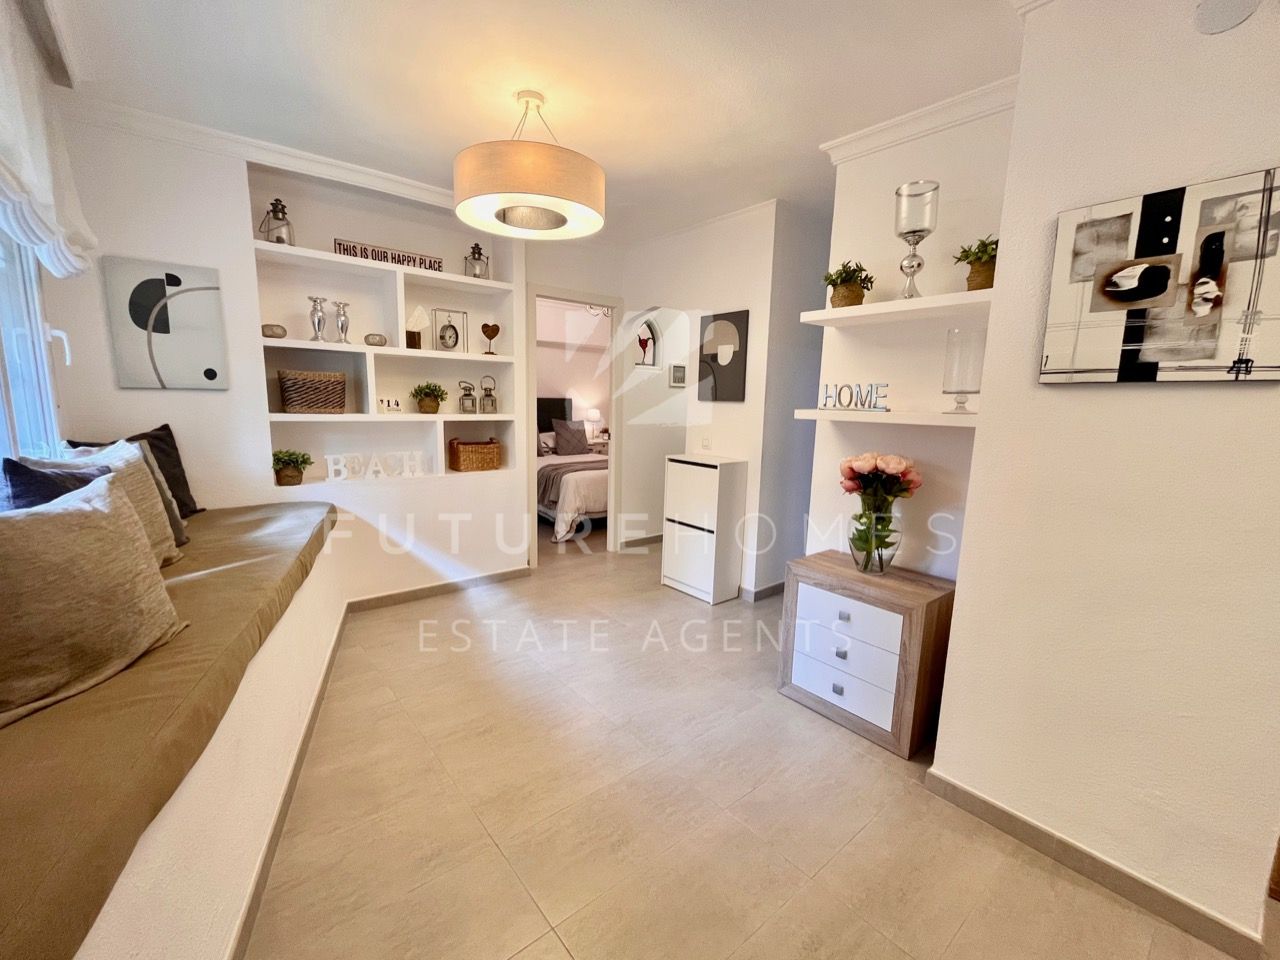 A pied-à-terre! Immaculate refurbished one bedroom apartment for sale in Estepona port